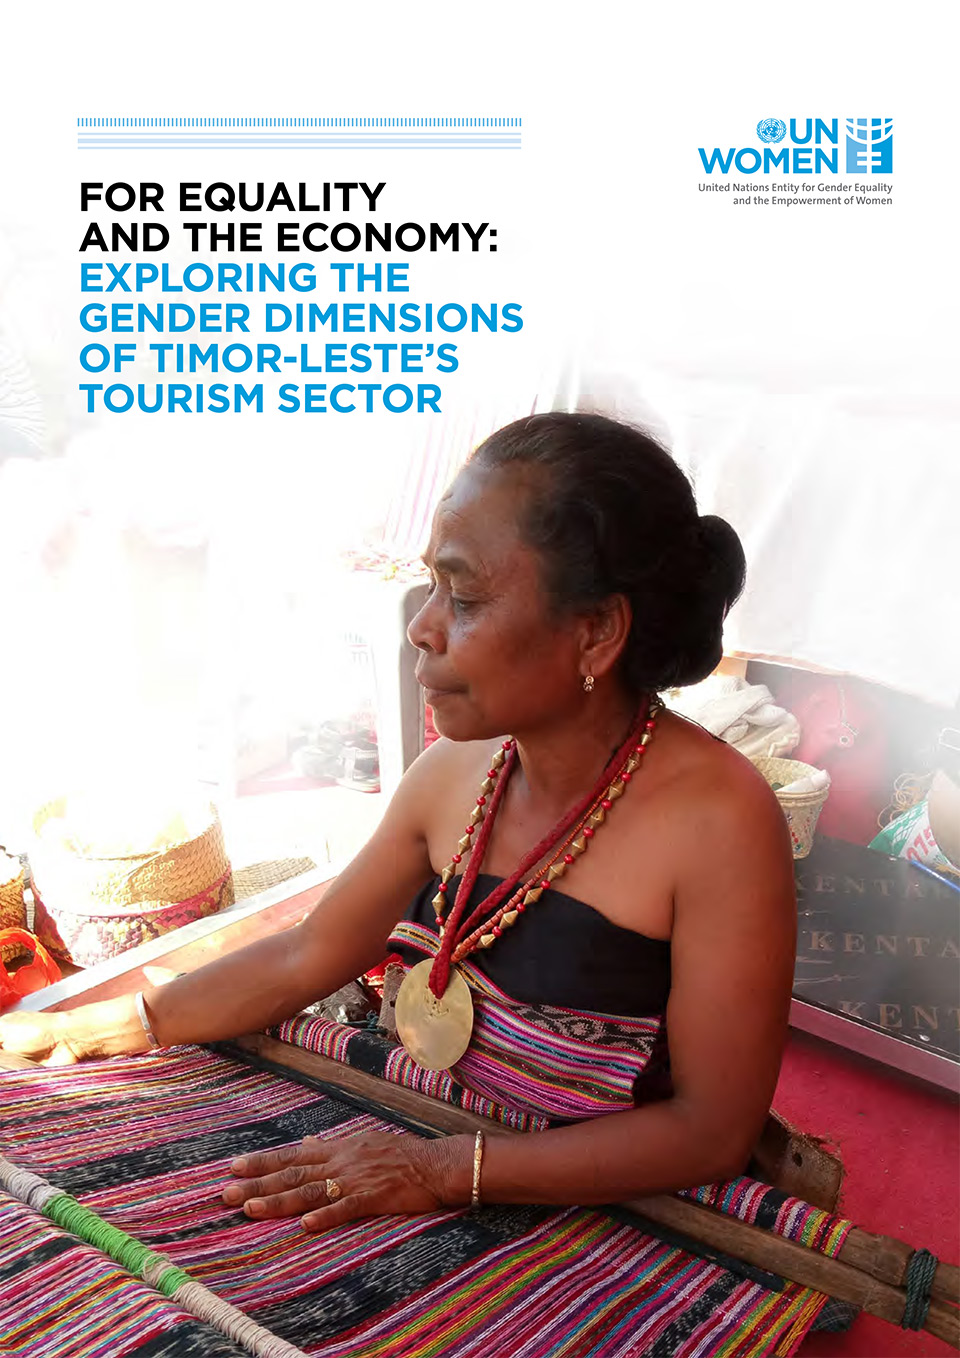 FOR EQUALITY AND THE ECONOMY: EXPLORING THE GENDER DIMENSIONS OF TIMOR-LESTE’S TOURISM SECTOR